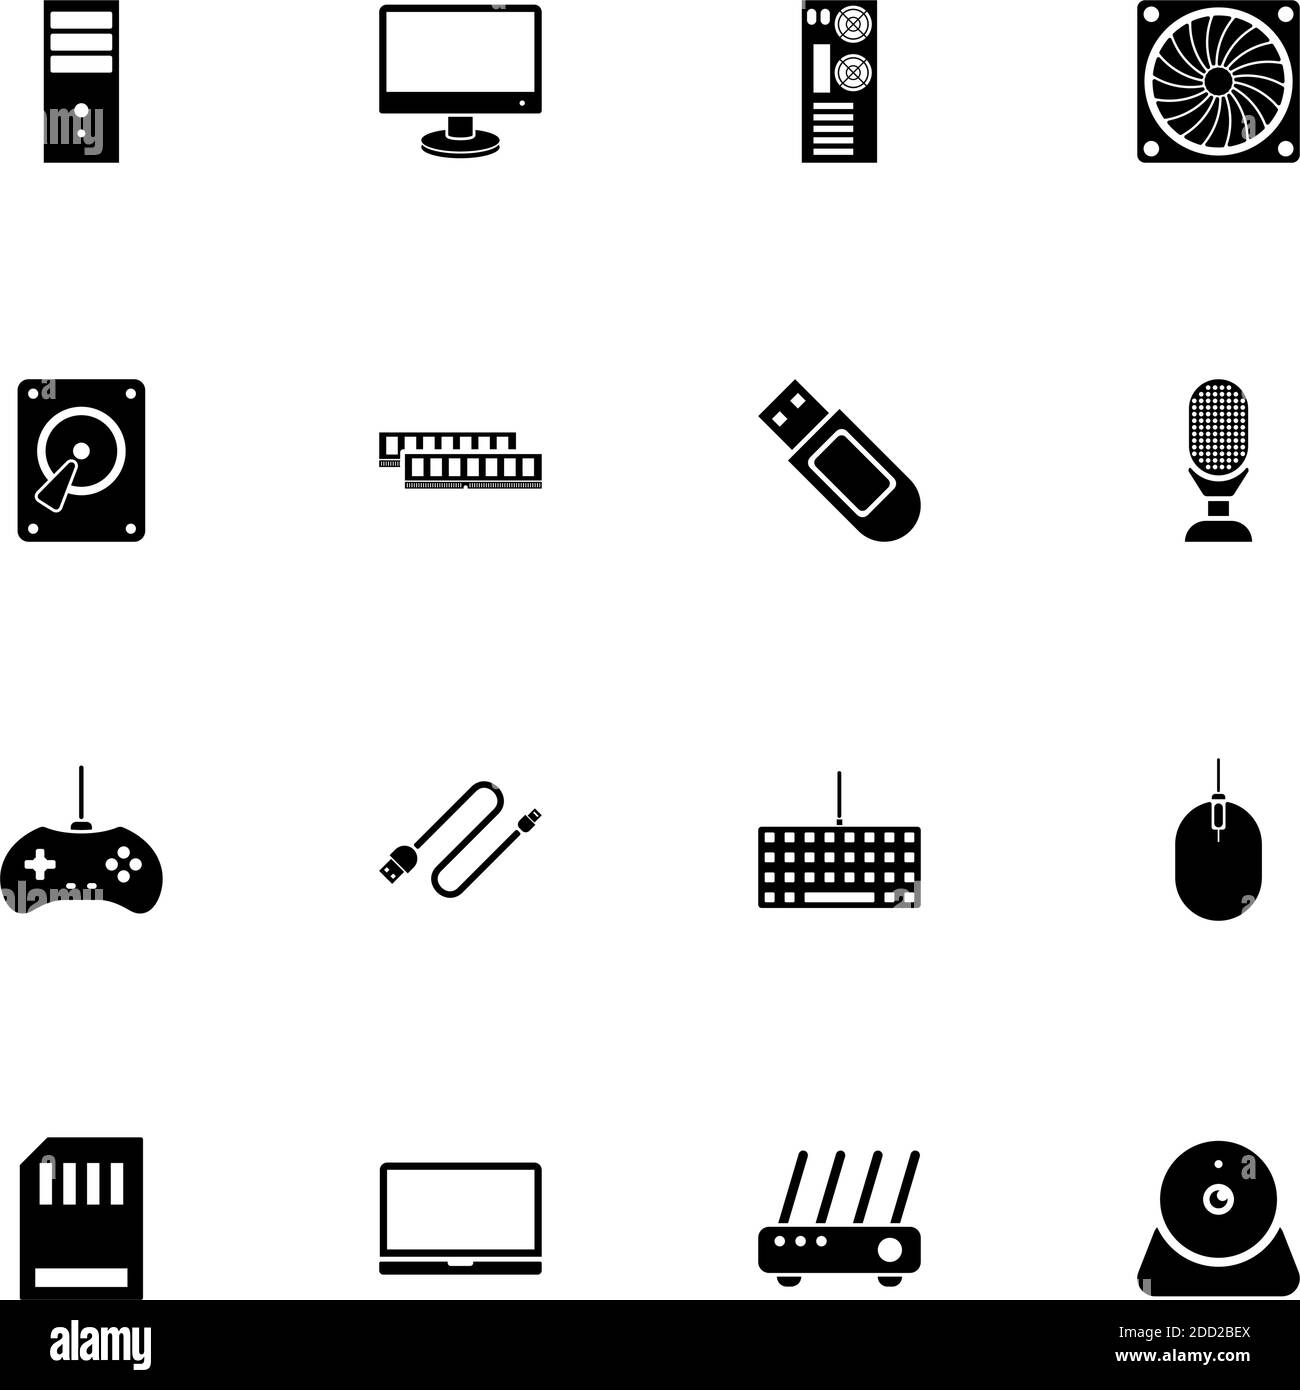 Hardware icon - Expand to any size - Change to any colour. Perfect Flat Vector Contains such Icons as usb flash, gamer joystick, monitor, router, hdd, Stock Vector